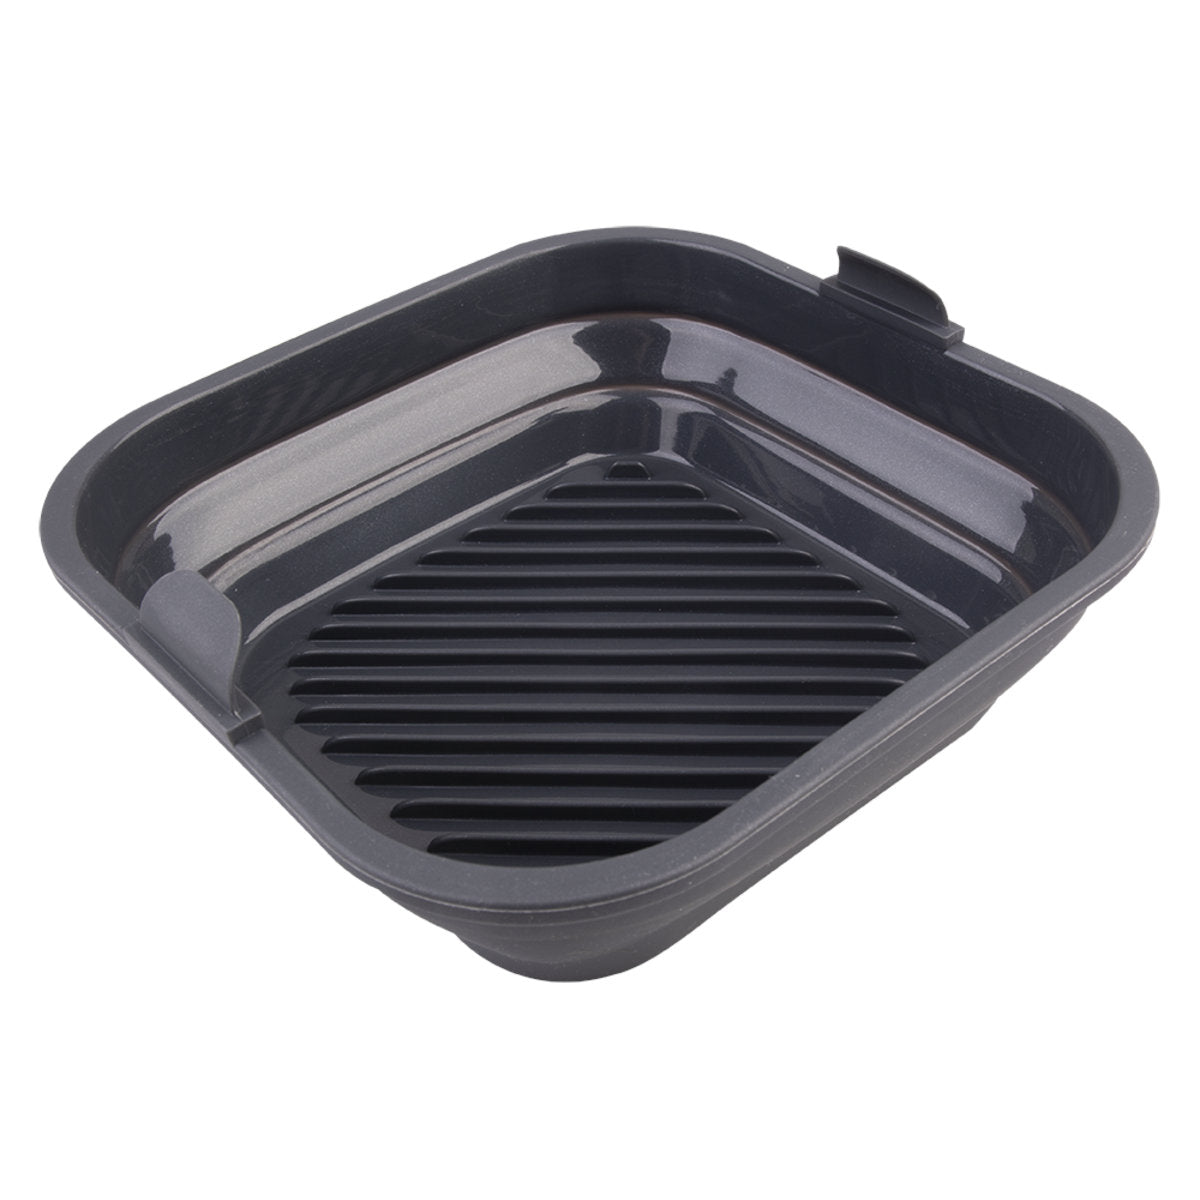 Cheap 22CM Silicone Air Fryer Baking Basket Liner Tray Food Safe